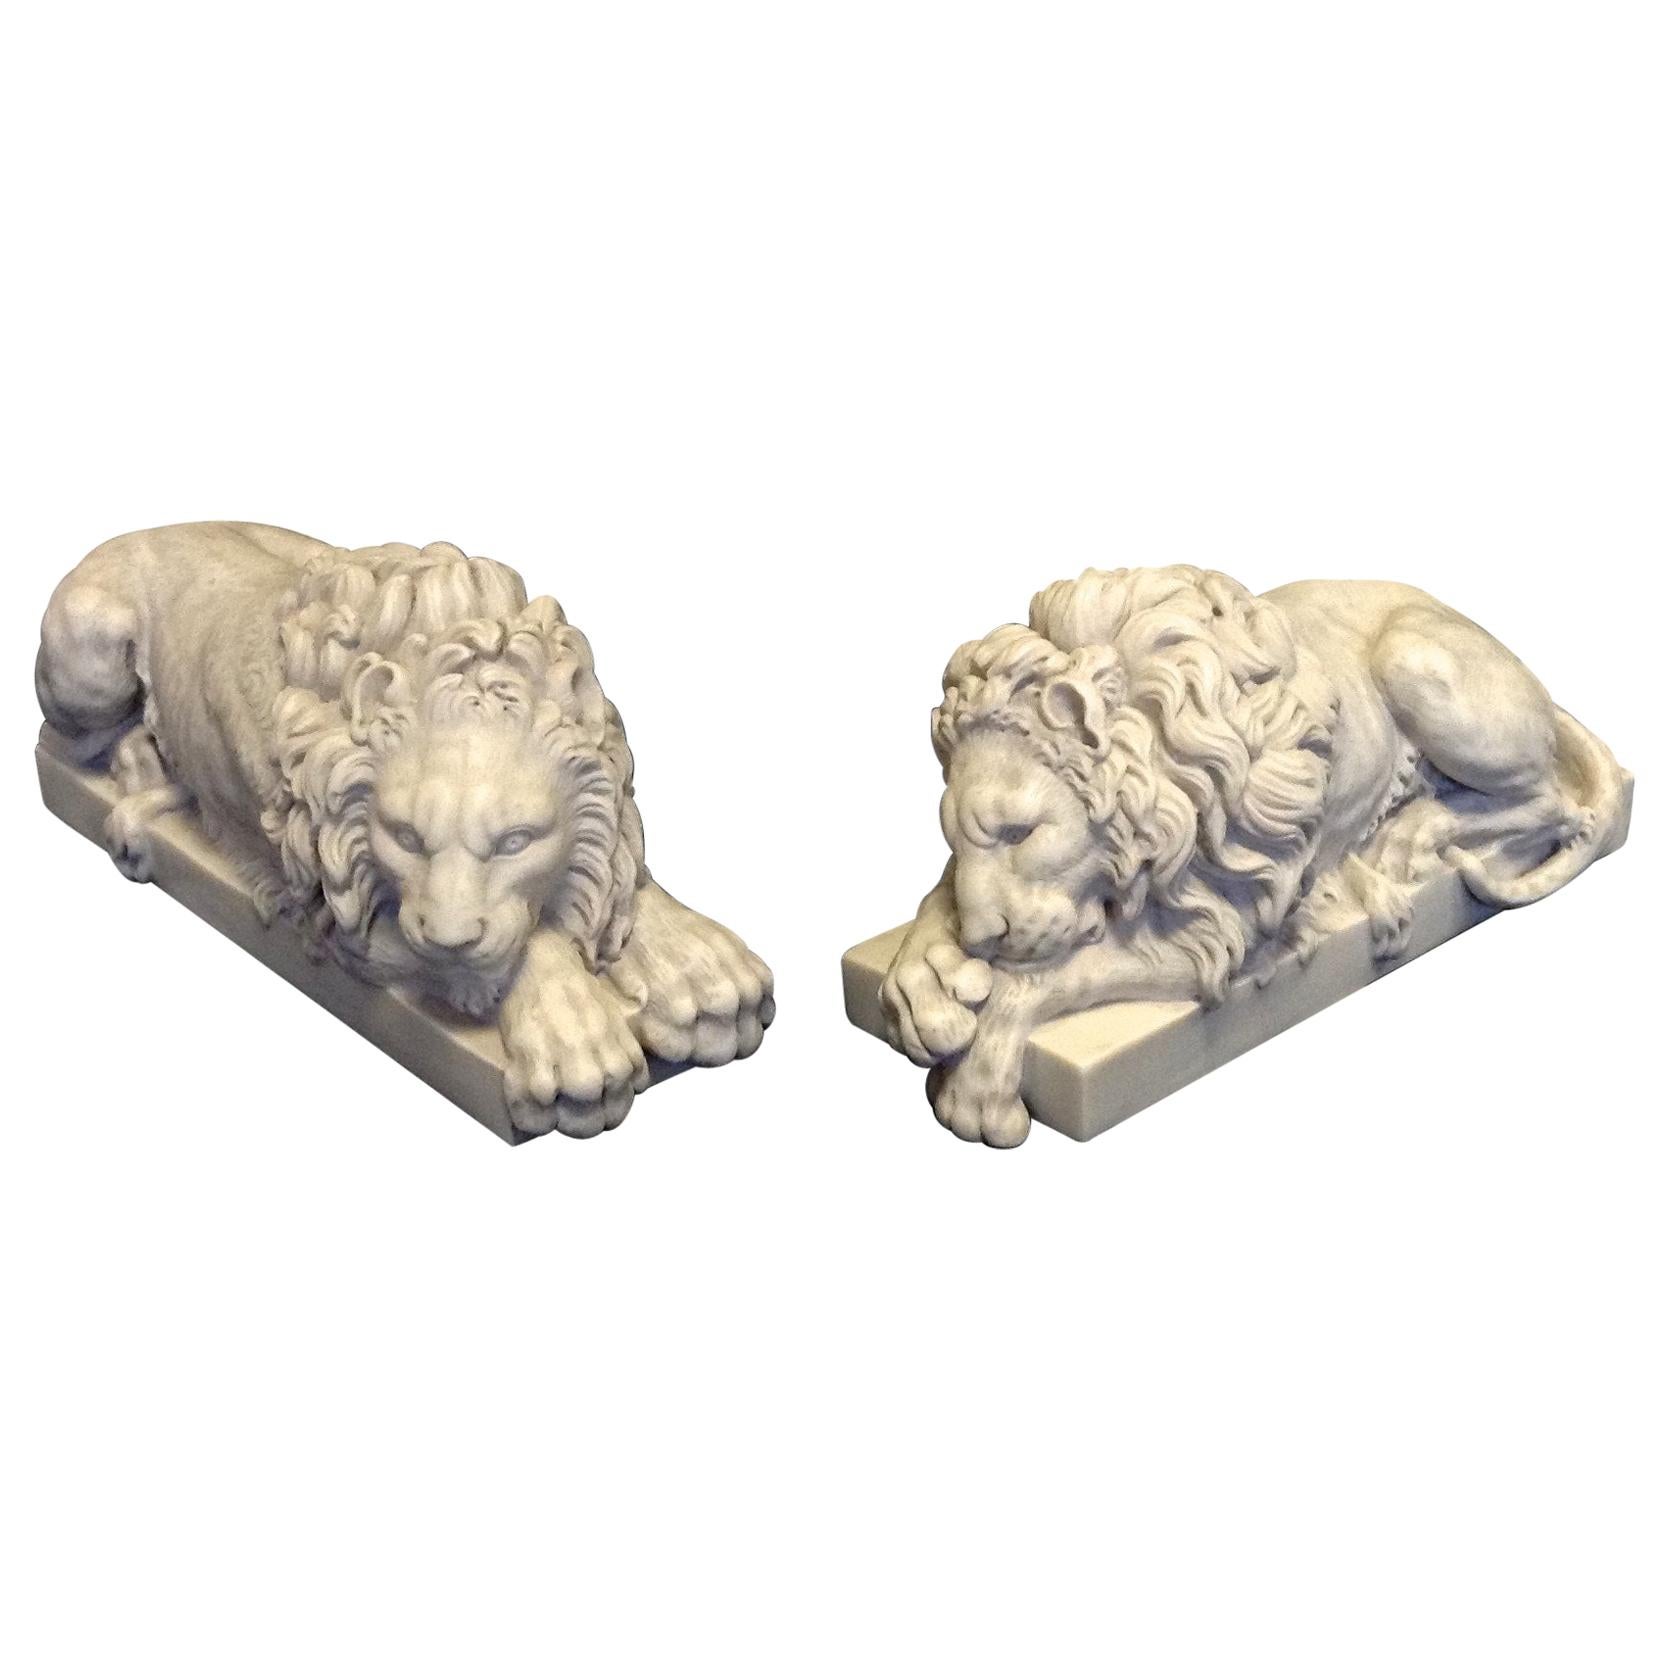 Chatsworth Marble Lions Pair, 20th Century For Sale